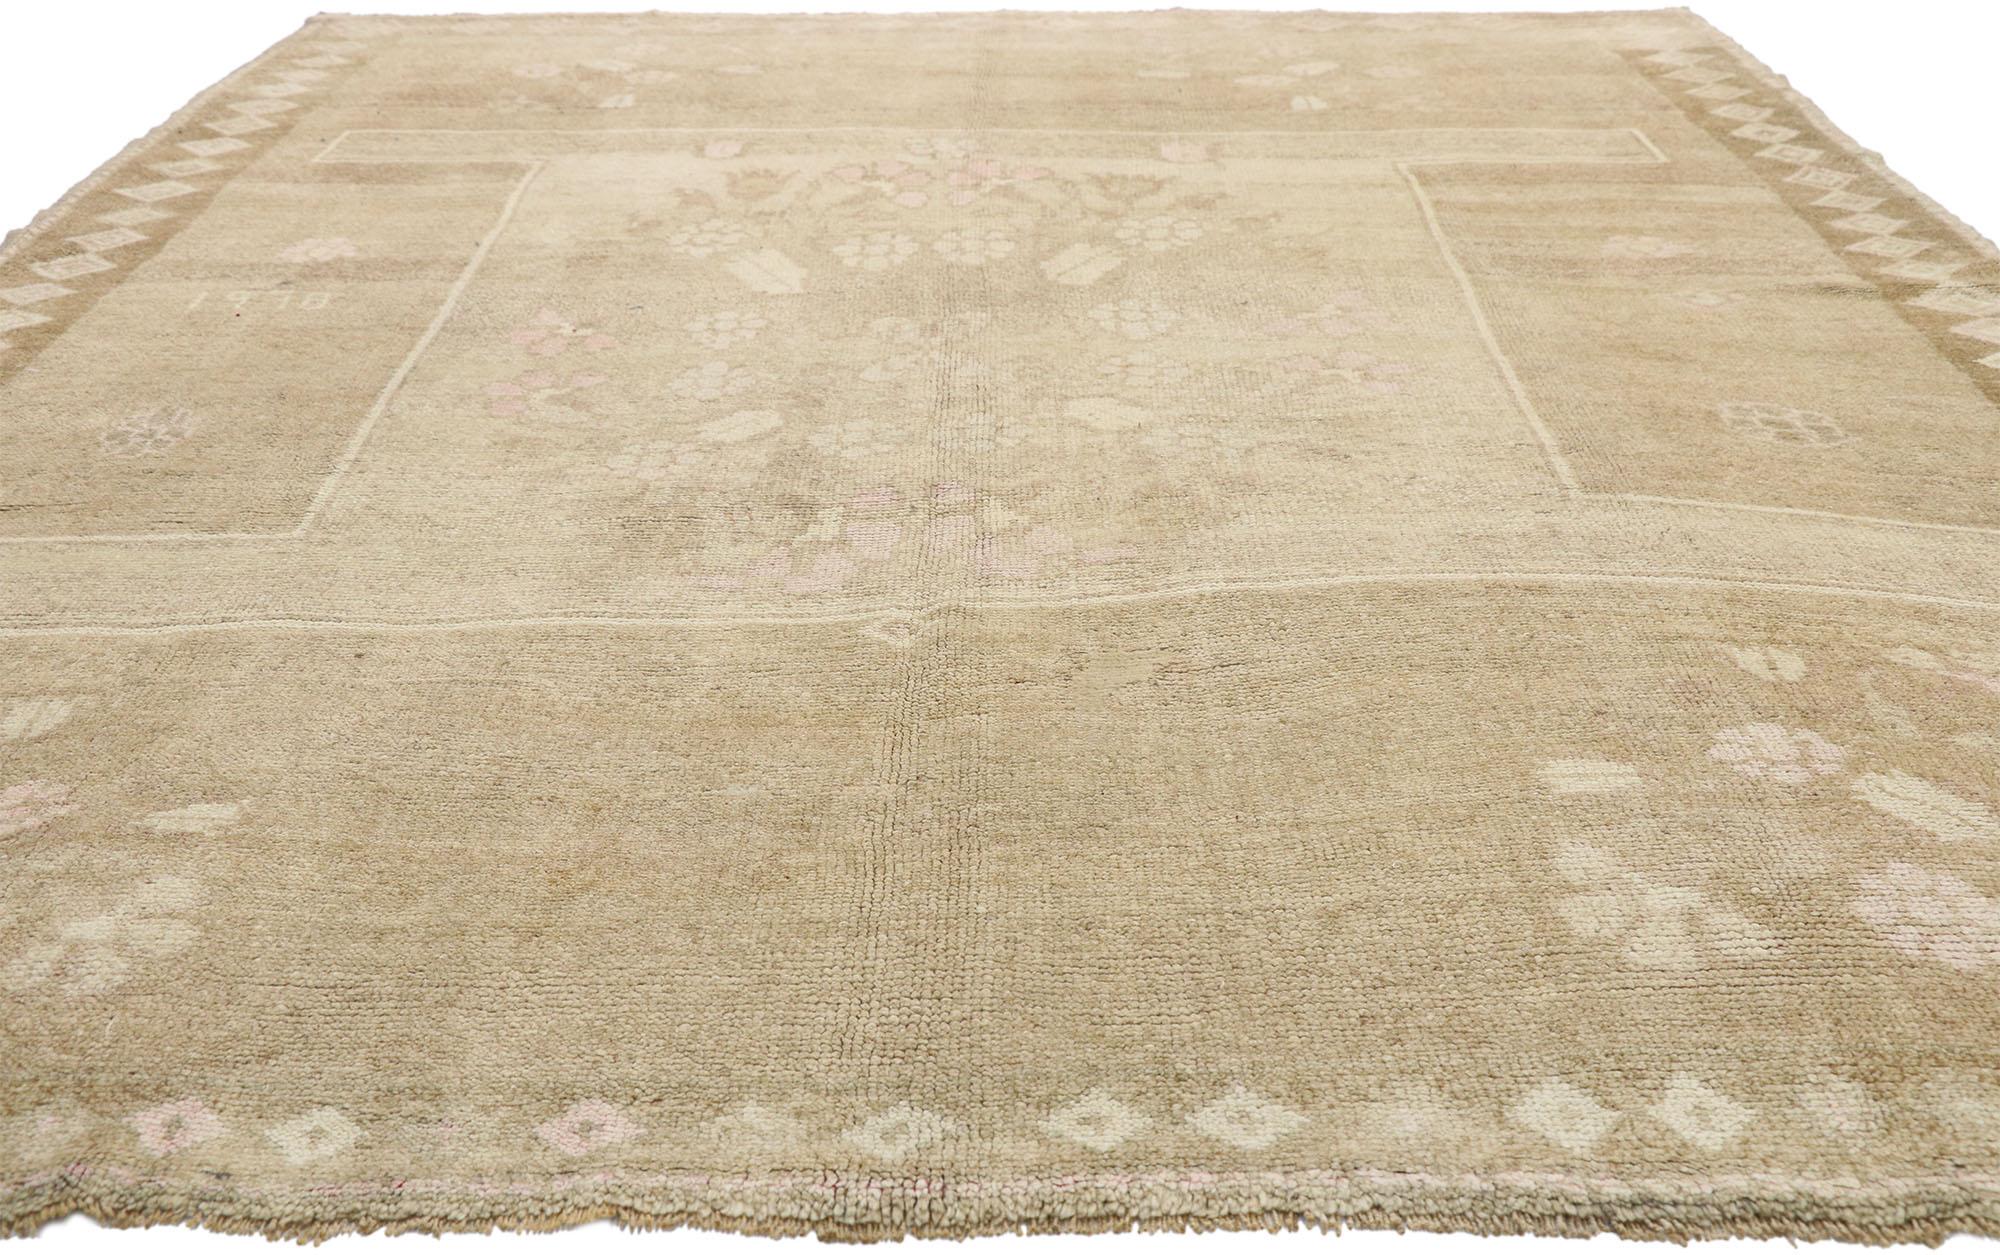 Colonial Revival Vintage Turkish Kars Rug with Modern Farmhouse and Romantic Prairie Style